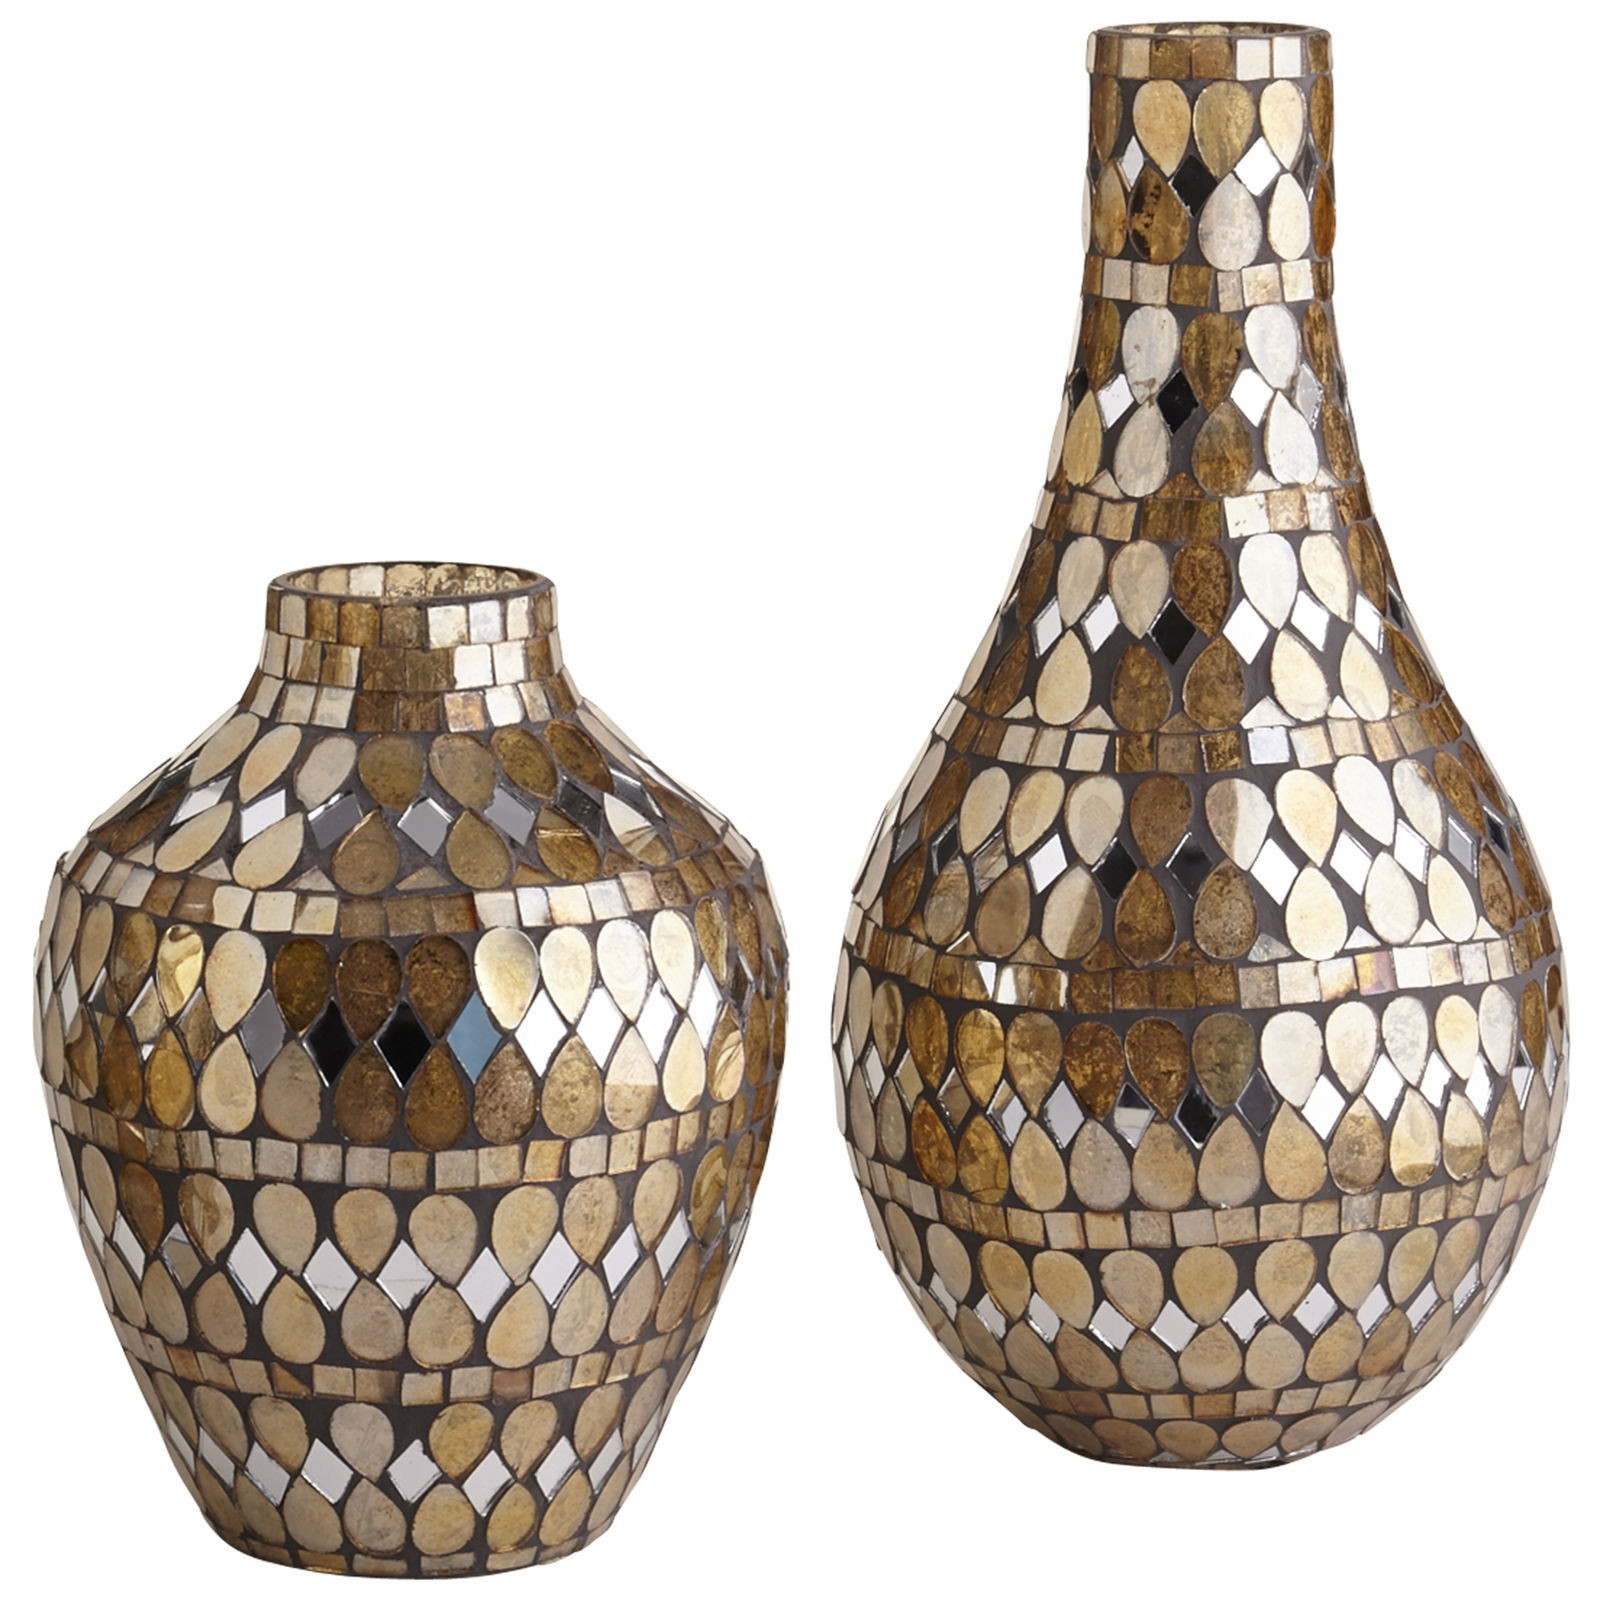 29 Ideal Tall Brown Floor Vases 2024 free download tall brown floor vases of home decoration vases 91fuecthjul sl1500 h vases tall floor home regarding home decoration vases vases home decor floor vase rakuten decoration for the corner in of